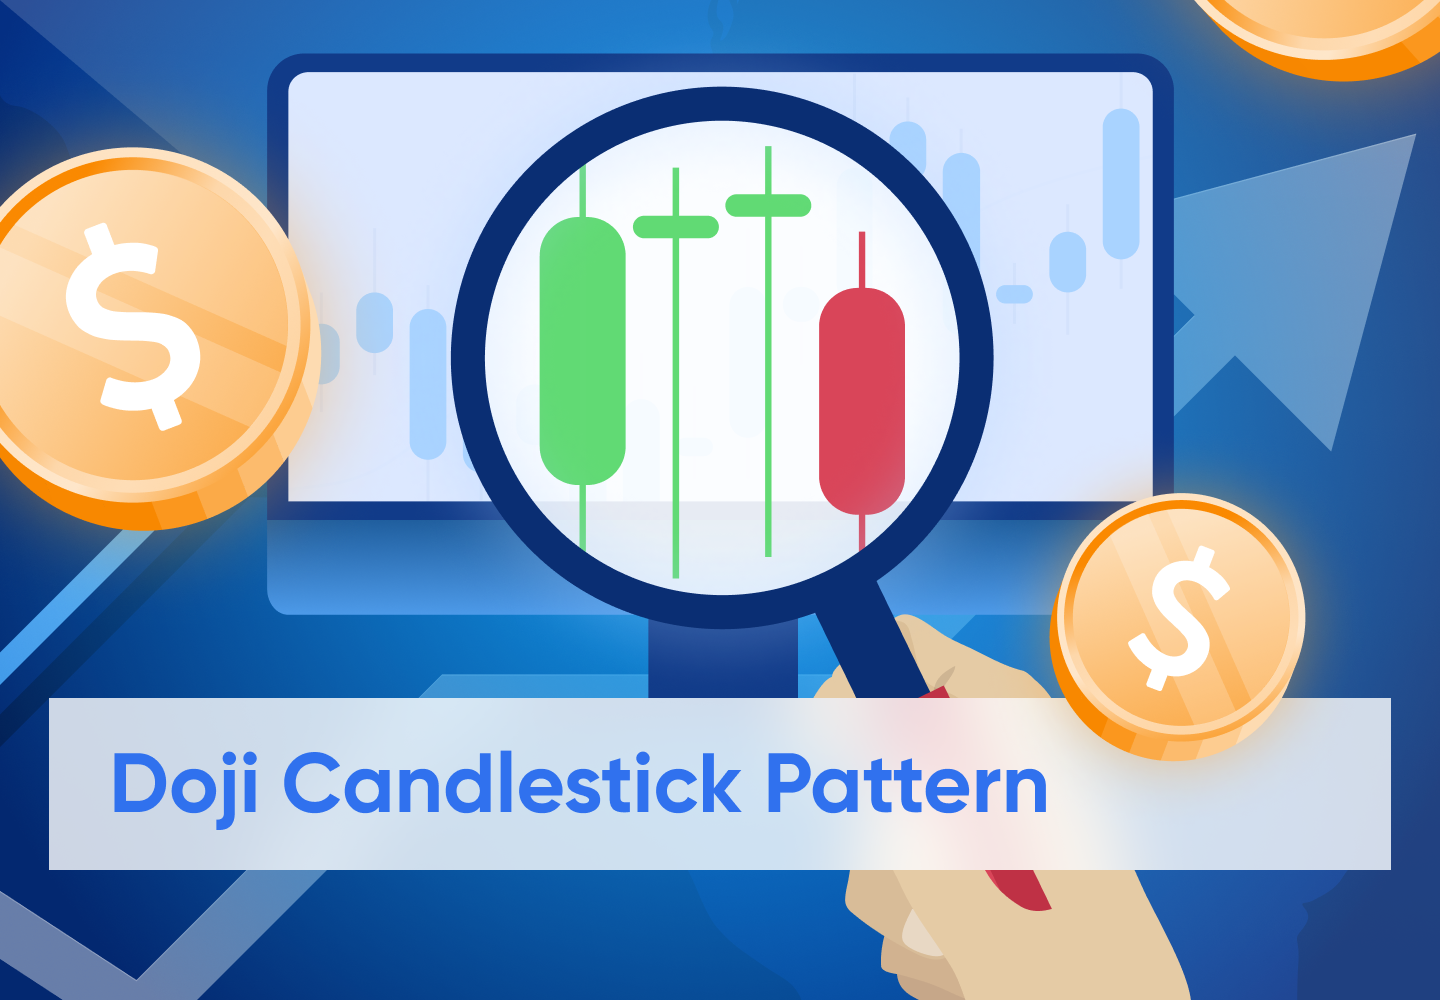 What Is A Doji Candlestick Pattern?